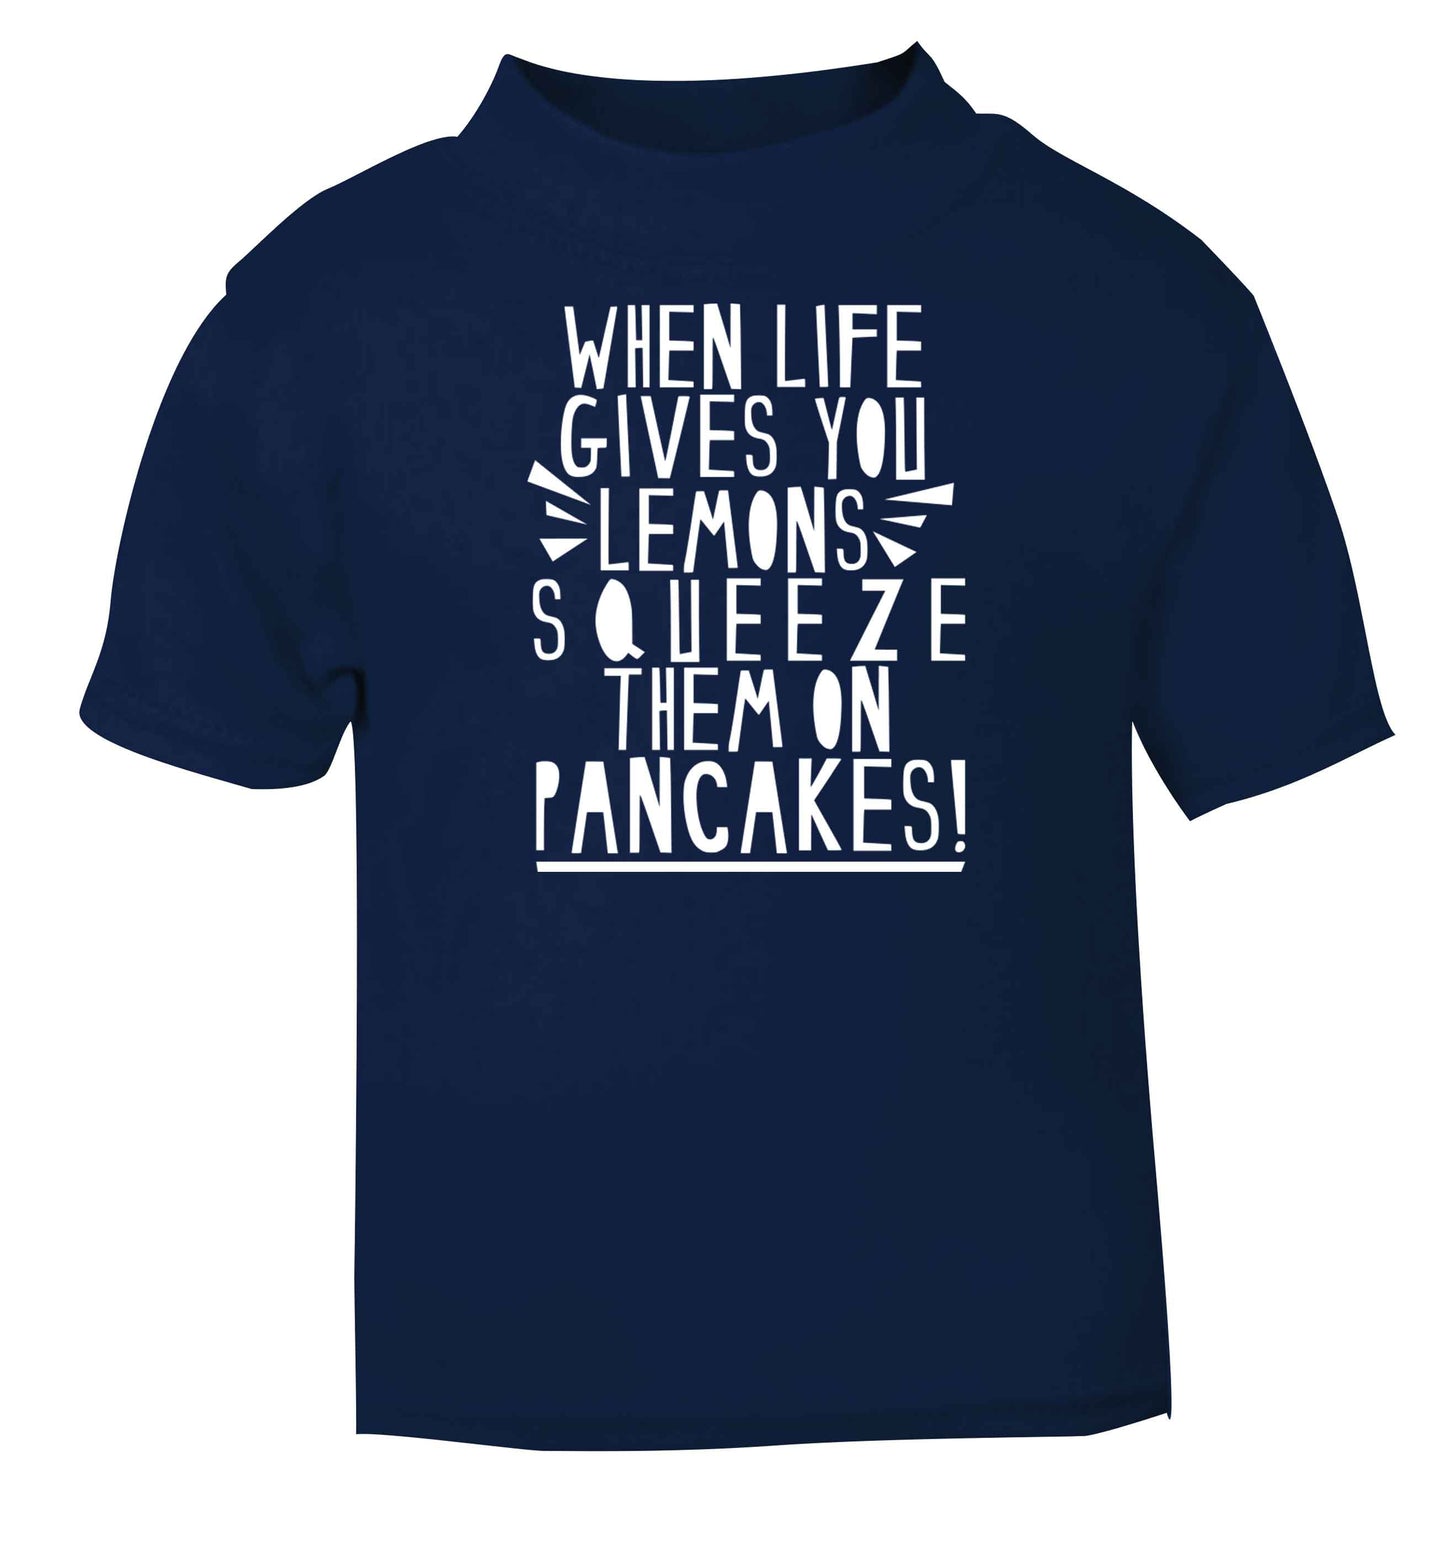 When life gives you lemons squeeze them on pancakes! navy baby toddler Tshirt 2 Years